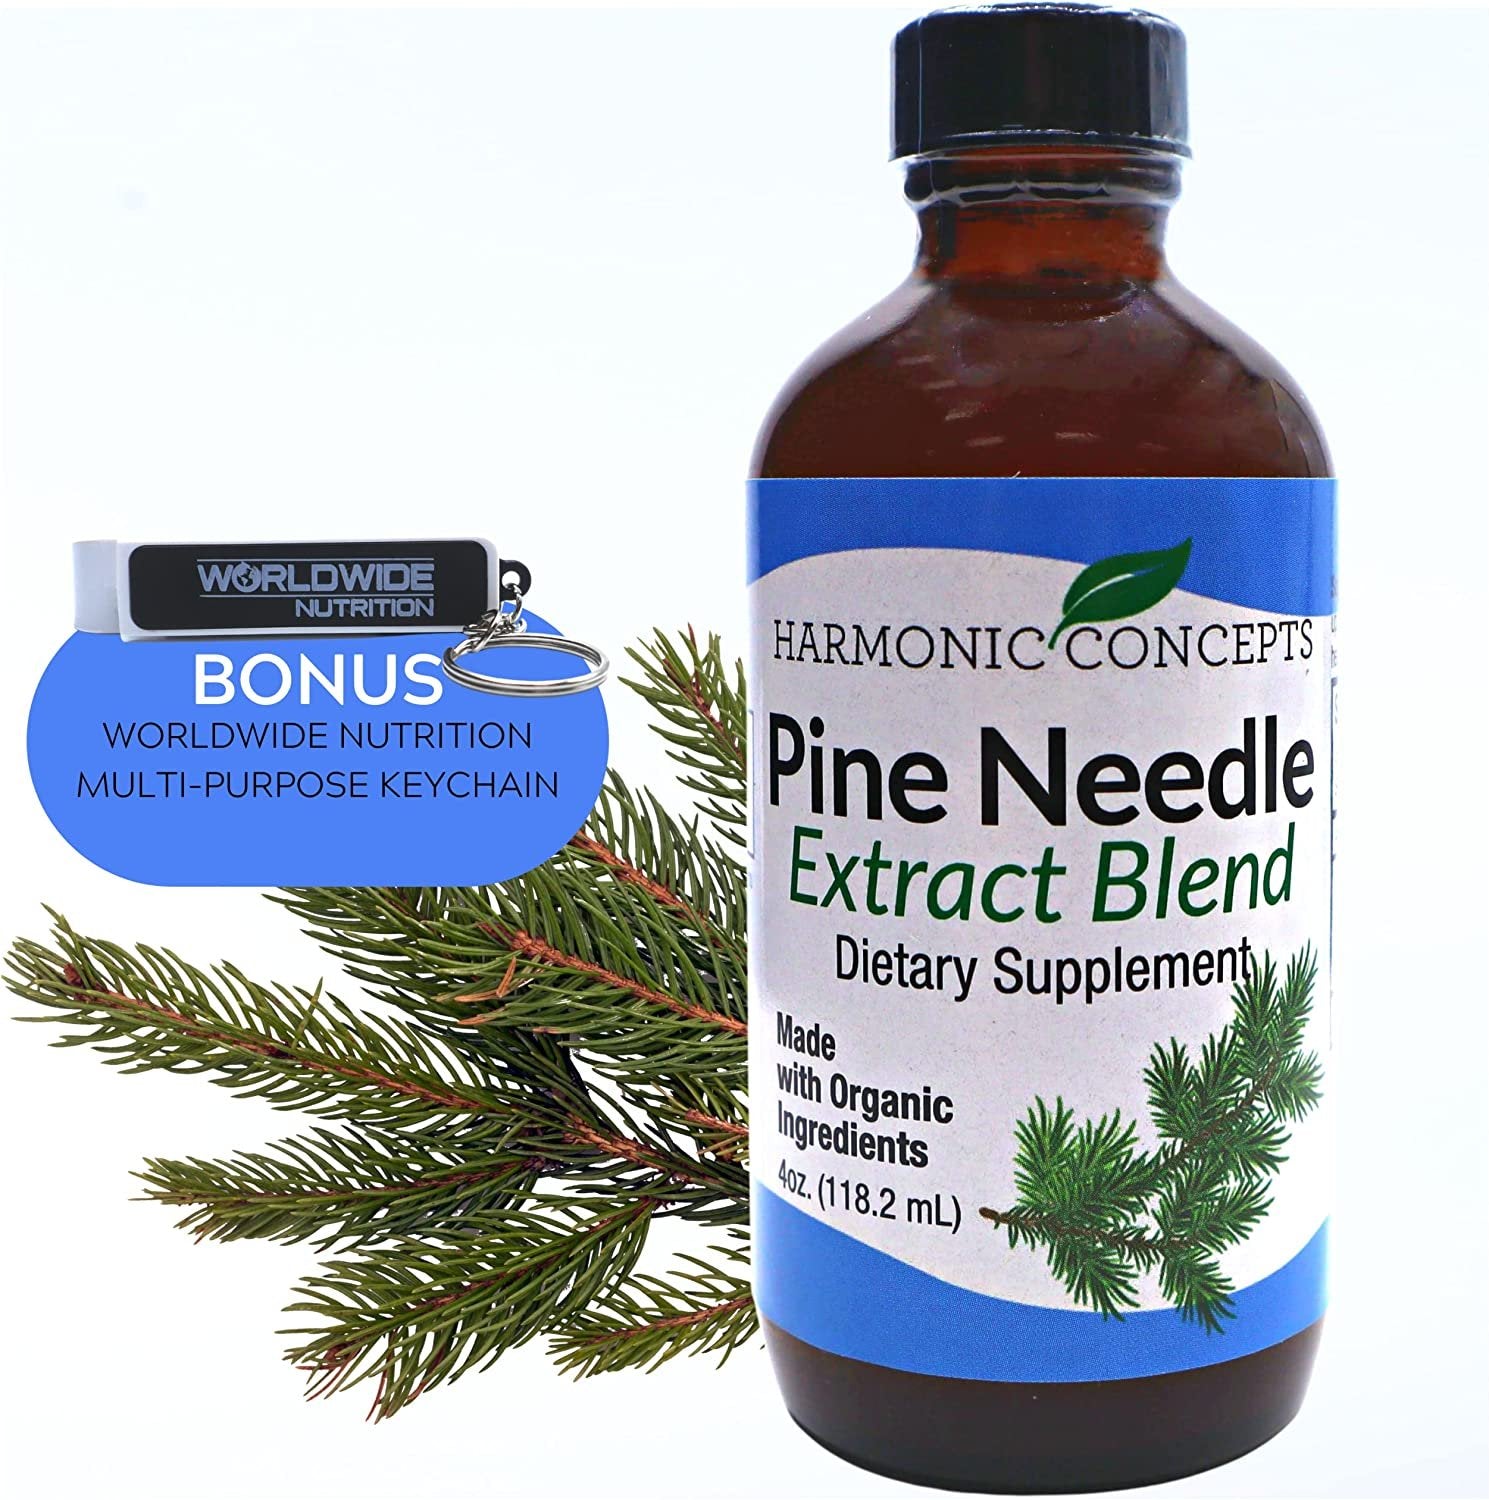 Harmonic Concepts Pine Needle Extract Blend - Organic Liquid Dietary Supplement - Vitamin A and Vitamin C - Immune Support Supplement - 4 Oz with Worldwide Nutrition Multi Purpose Key Chain